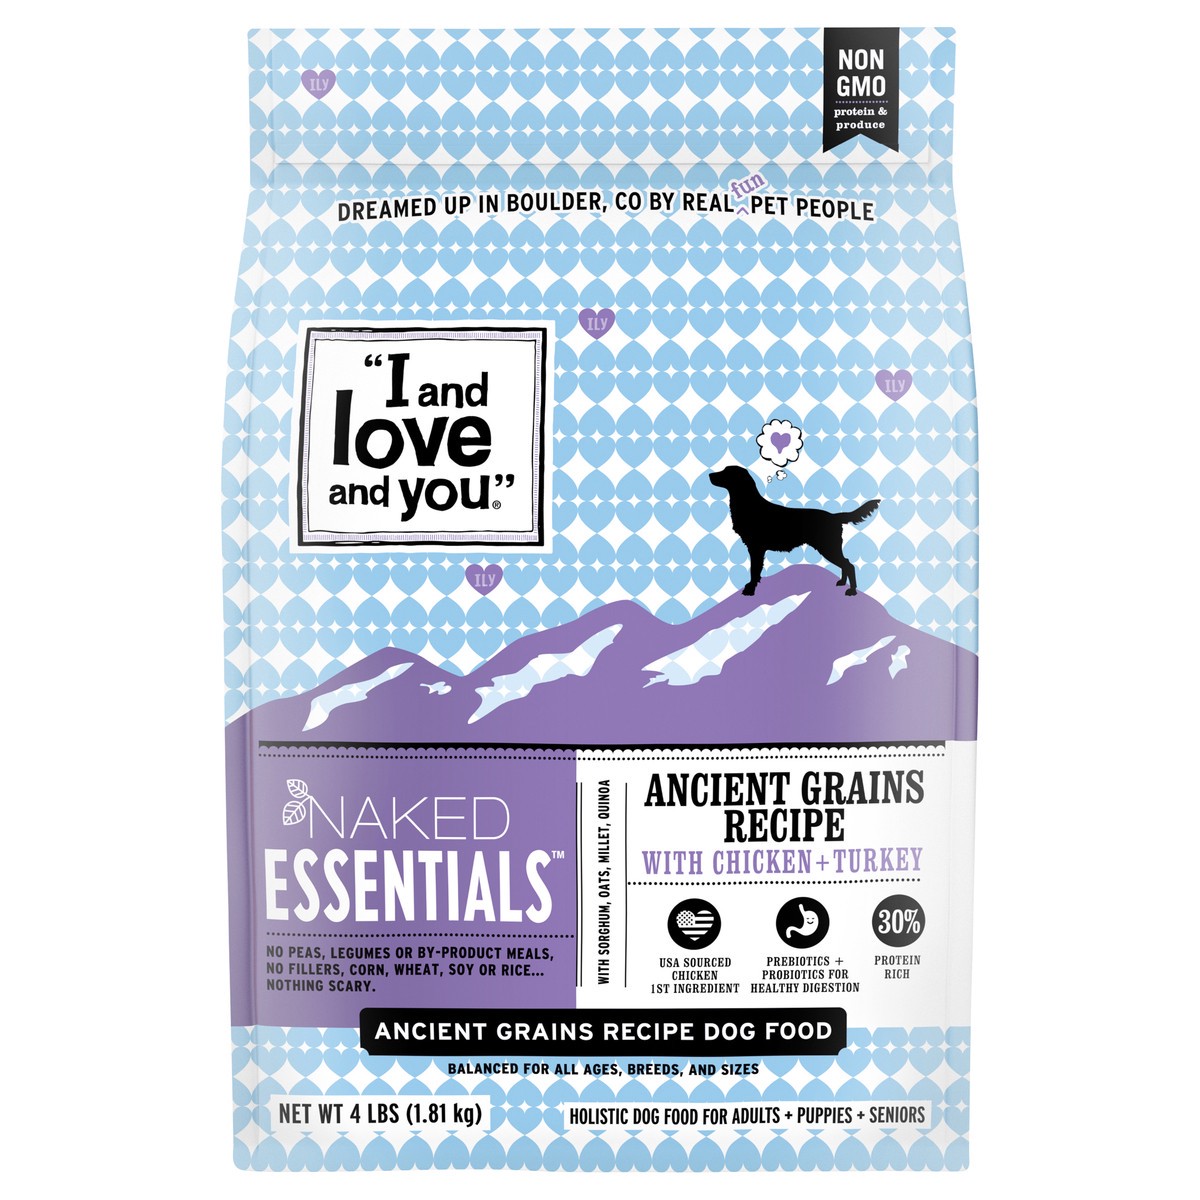 slide 7 of 10, I and Love and You "I and love and you" Naked Essentials Ancient Grains Dry Dog Food, Chicken and Turkey Recipe, Prebiotics and Probiotics, Real Meat, No Fillers, 4lb Bag, 4 lb